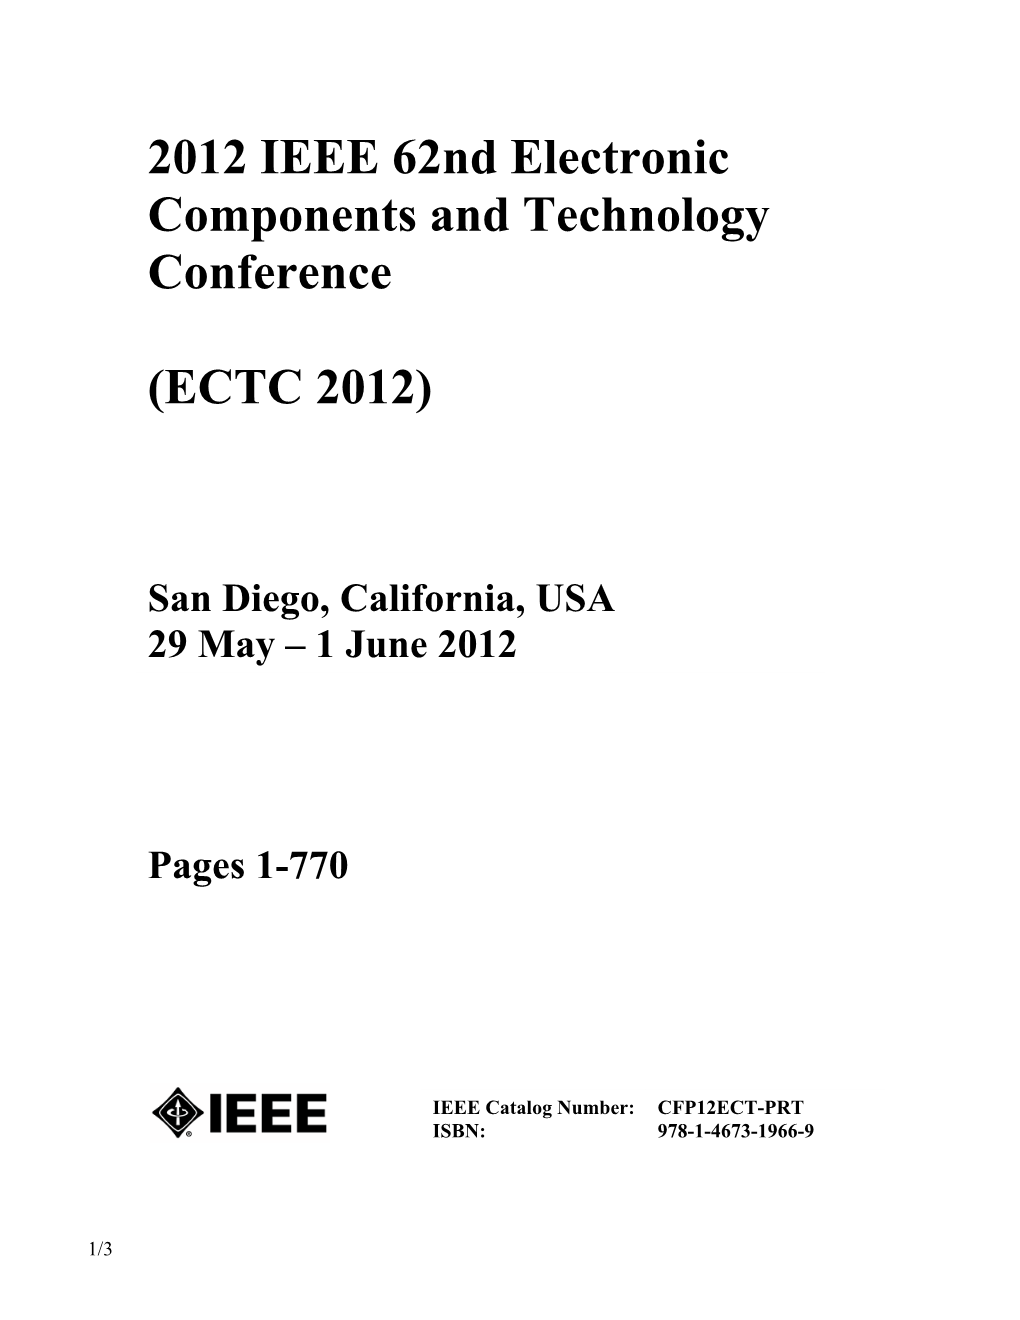 2012 IEEE 62Nd Electronic Components and Technology Conference